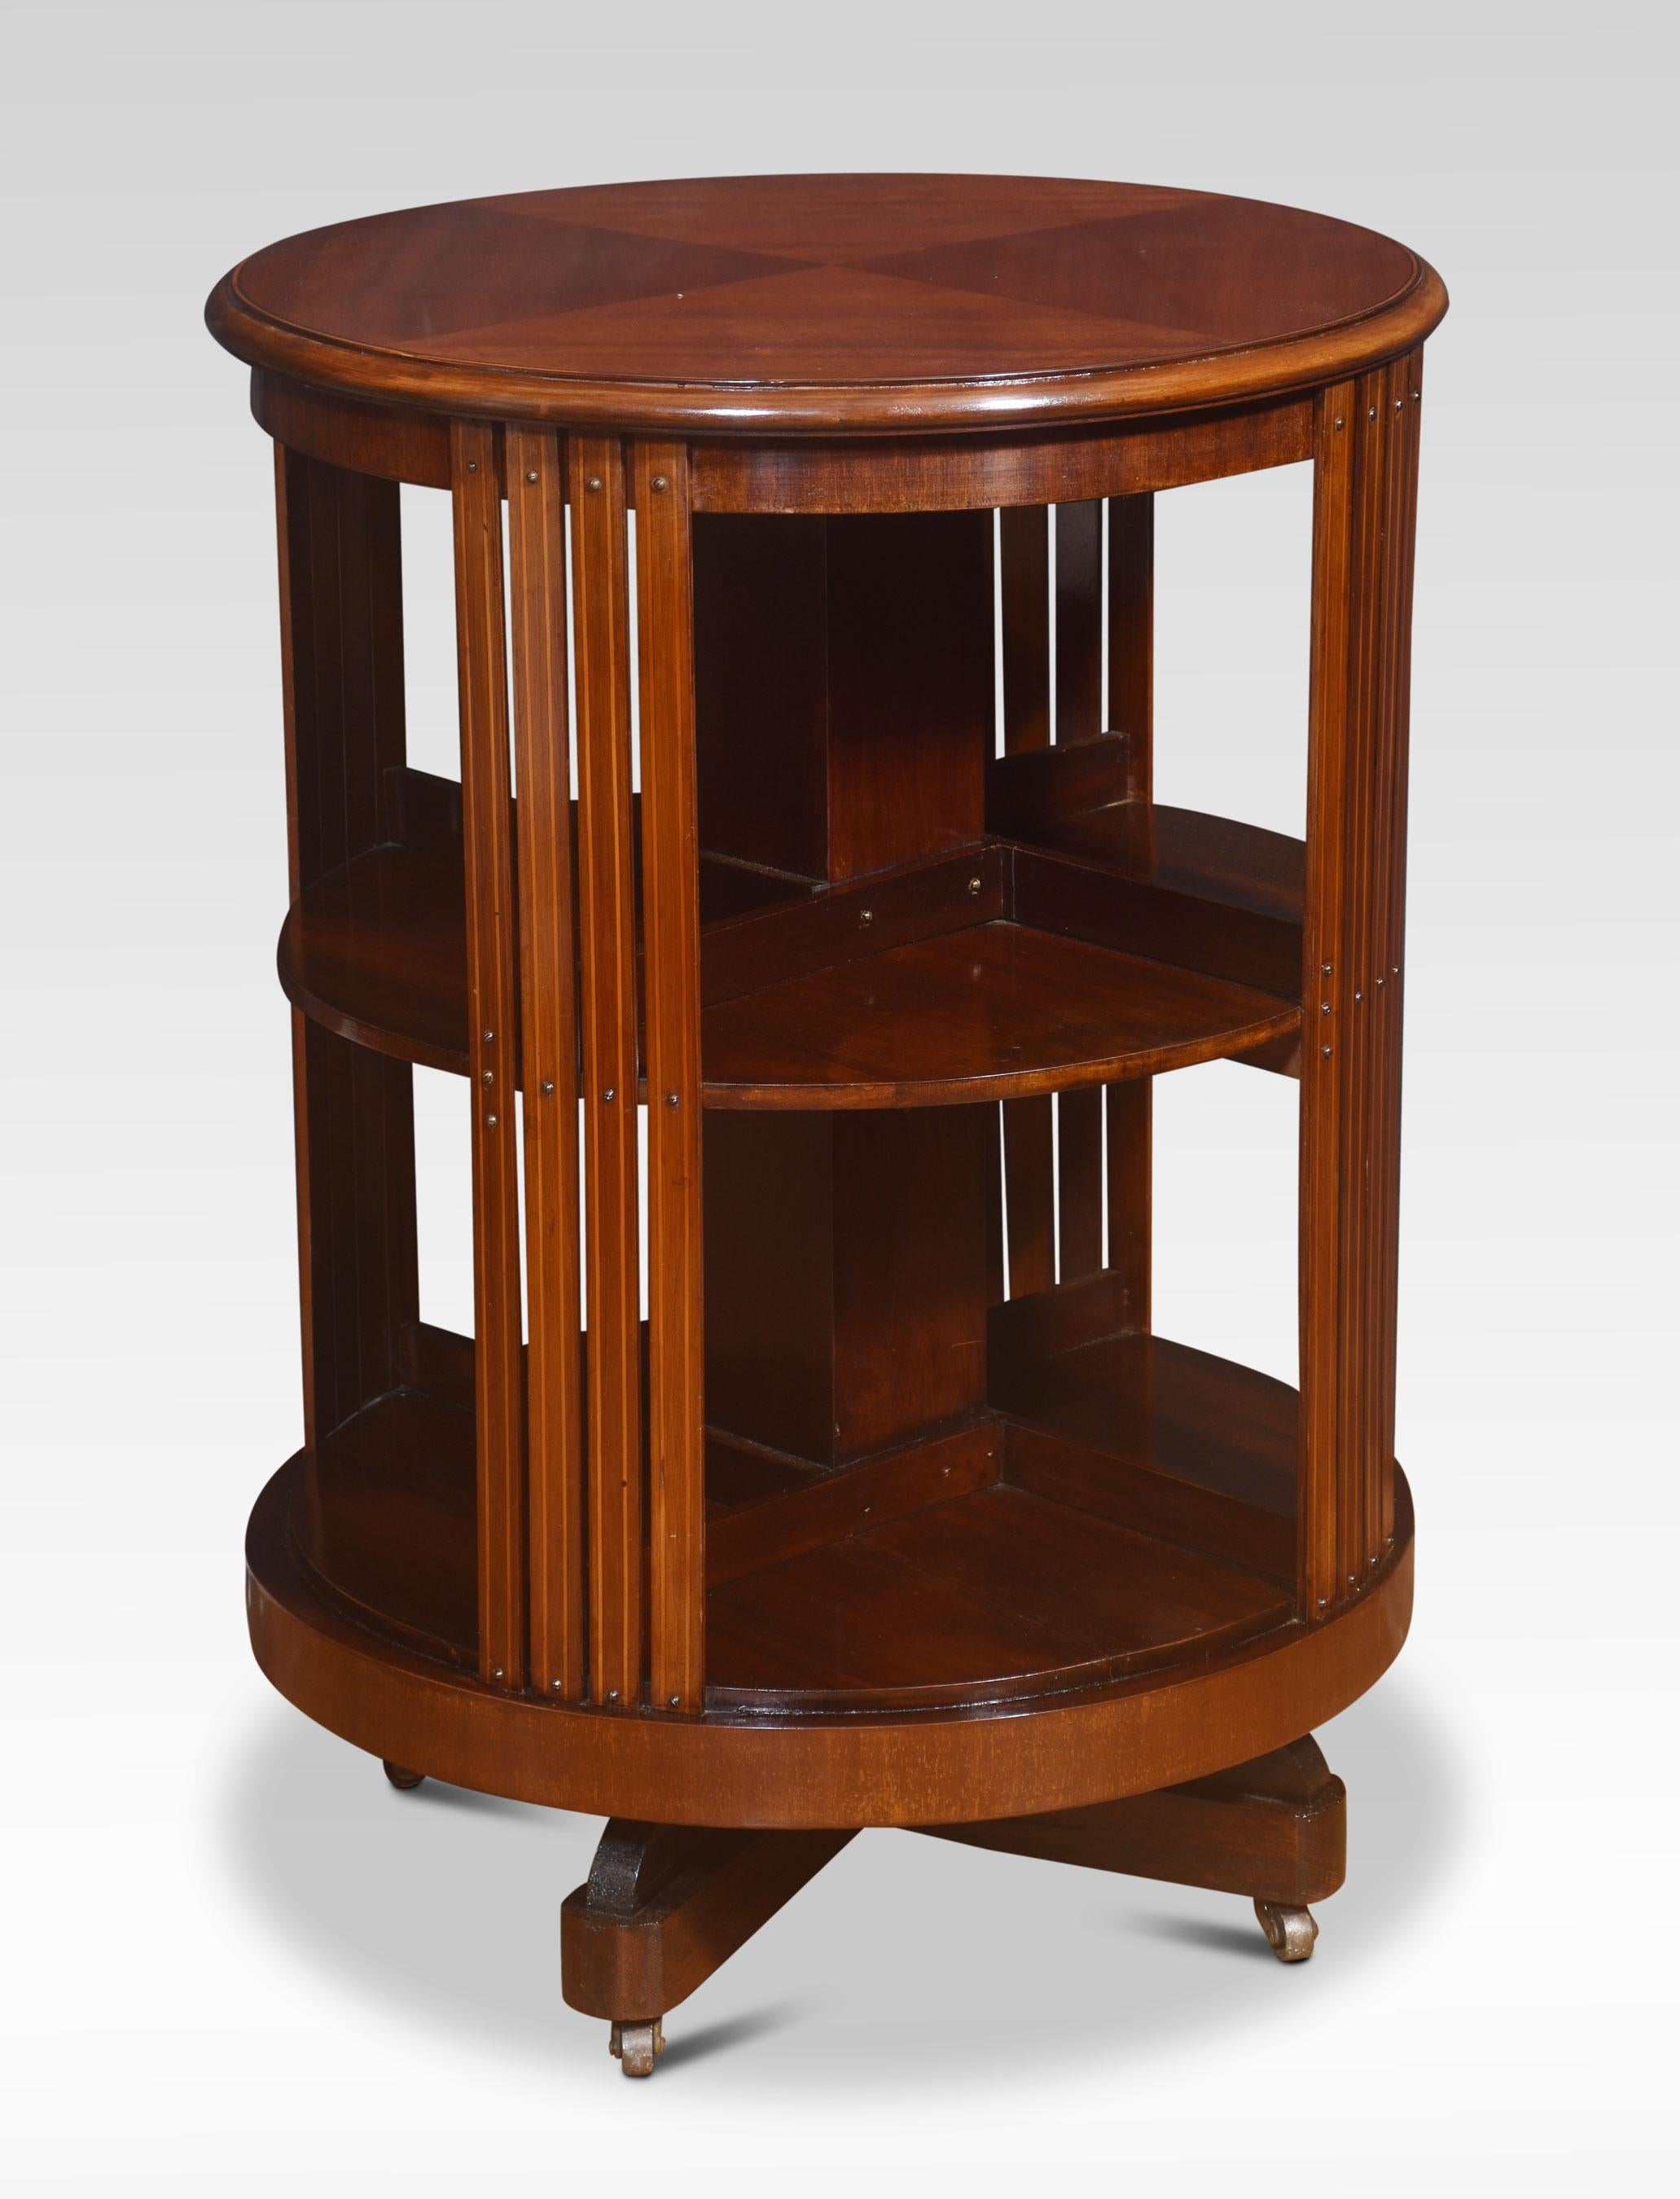 Circular revolving bookcase, the quarter veneered mahogany top with moulded edge, above an argument of shelves. All raised up on cruciform base with castors.
Dimensions
Height 31.5 Inches
Width 23 Inches
Depth 23 Inches